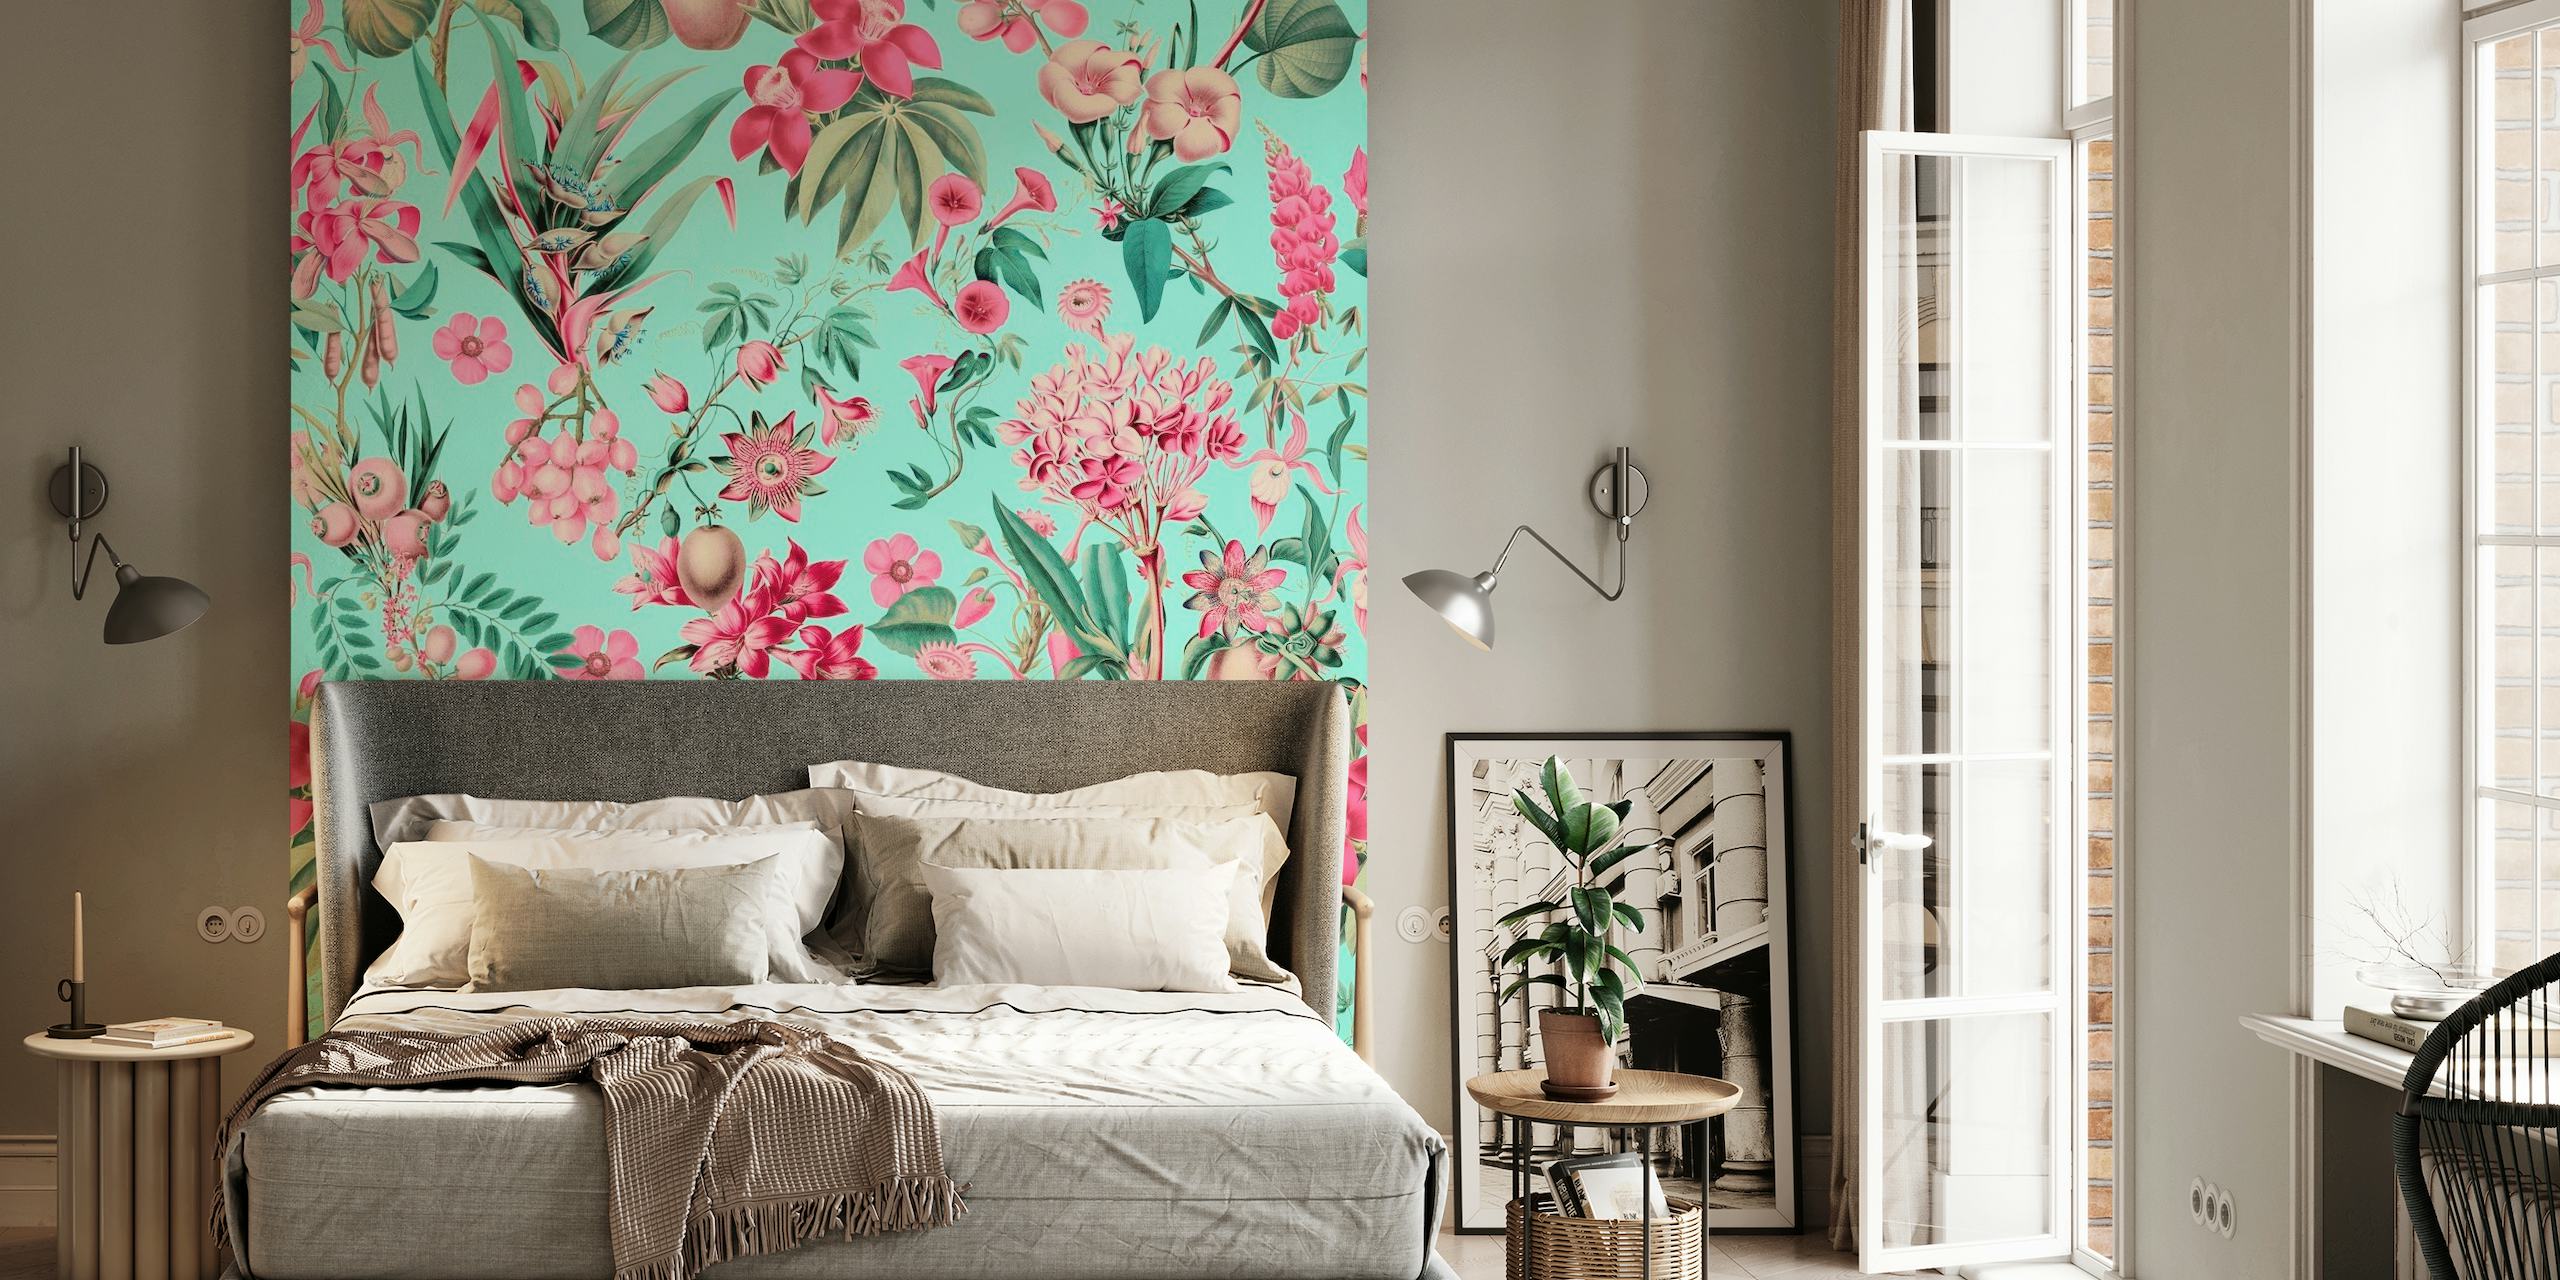 Tropical Jungle Flower And Fruit Garden Pattern In Pink And Teal wallpaper